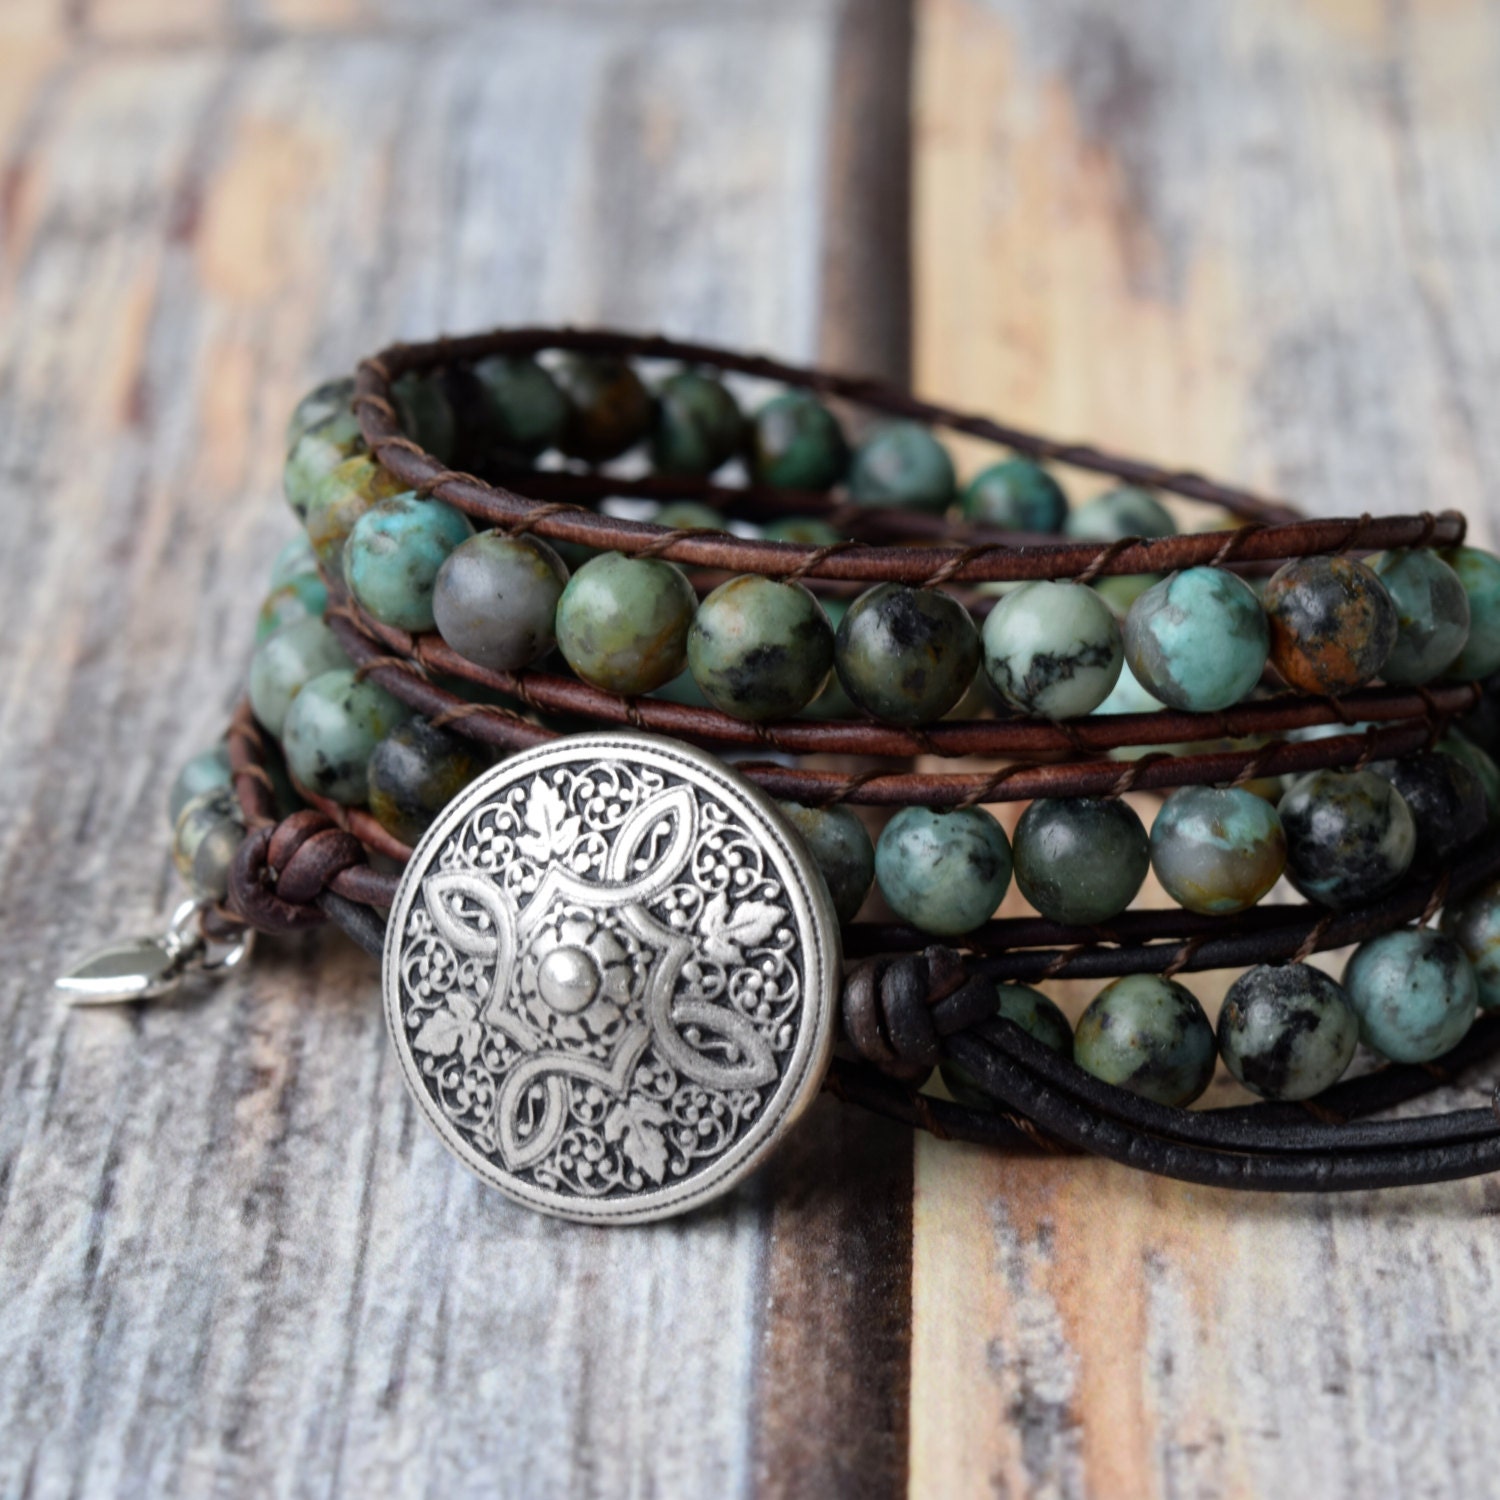 African Turquoise Leather Wrap Bracelet, Wrap Bracelet, Beaded Wrap Bracelet, Leather Wrap Bracelet, Wrap Bracelet Leather, Teal Green